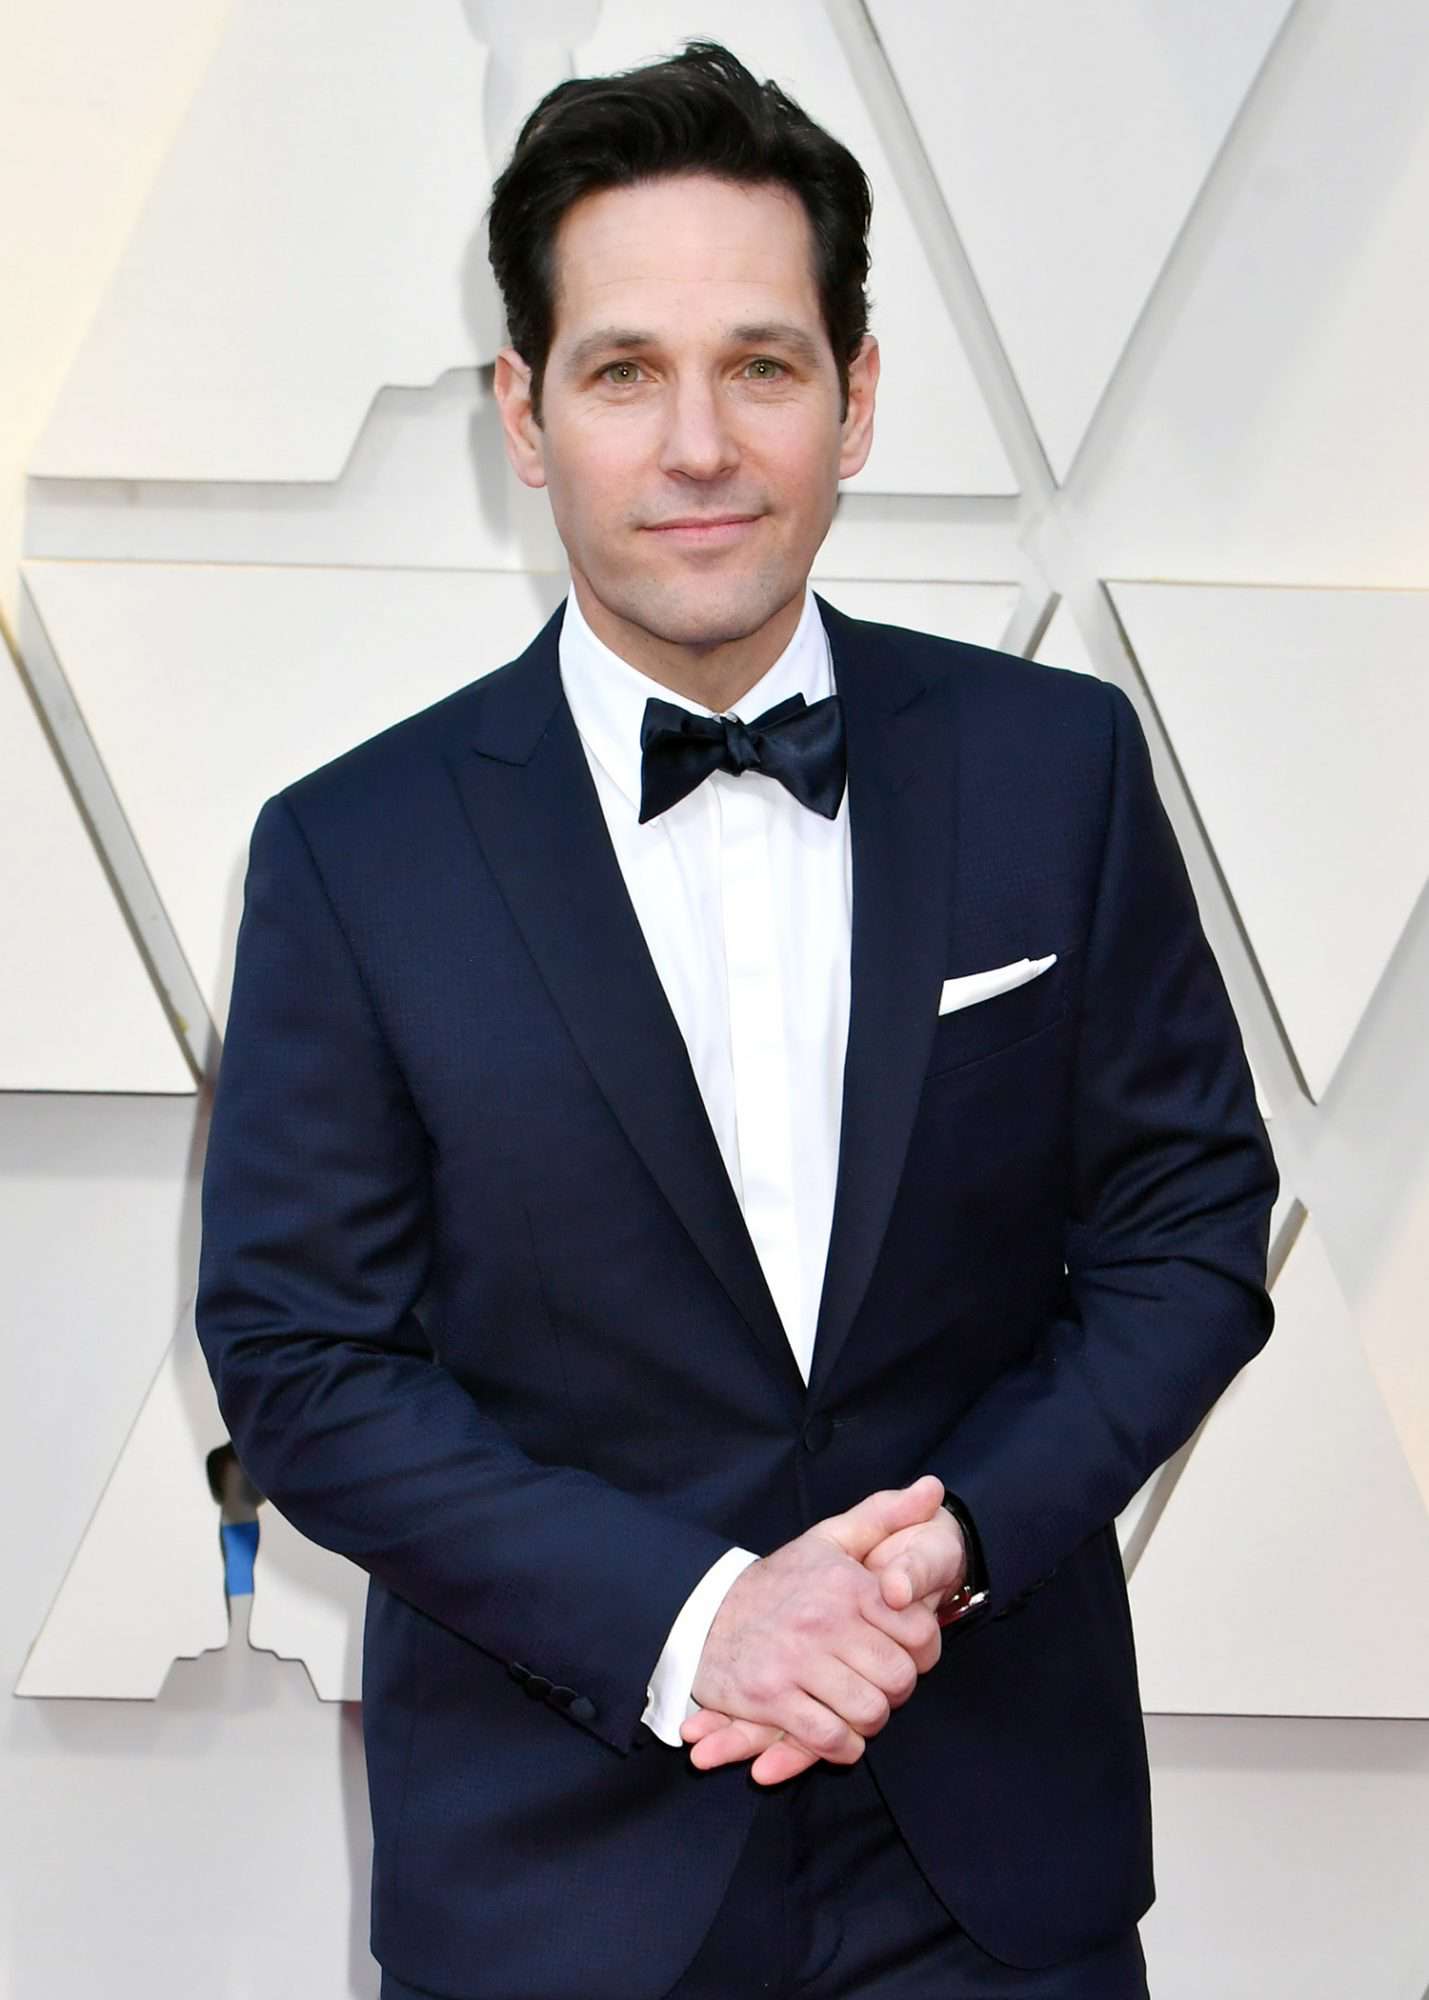 HOLLYWOOD, CA - FEBRUARY 24: Paul Rudd attends the 91st Annual Academy Awards at Hollywood and Highland on February 24, 2019 in Hollywood, California. (Photo by Jeff Kravitz/FilmMagic)